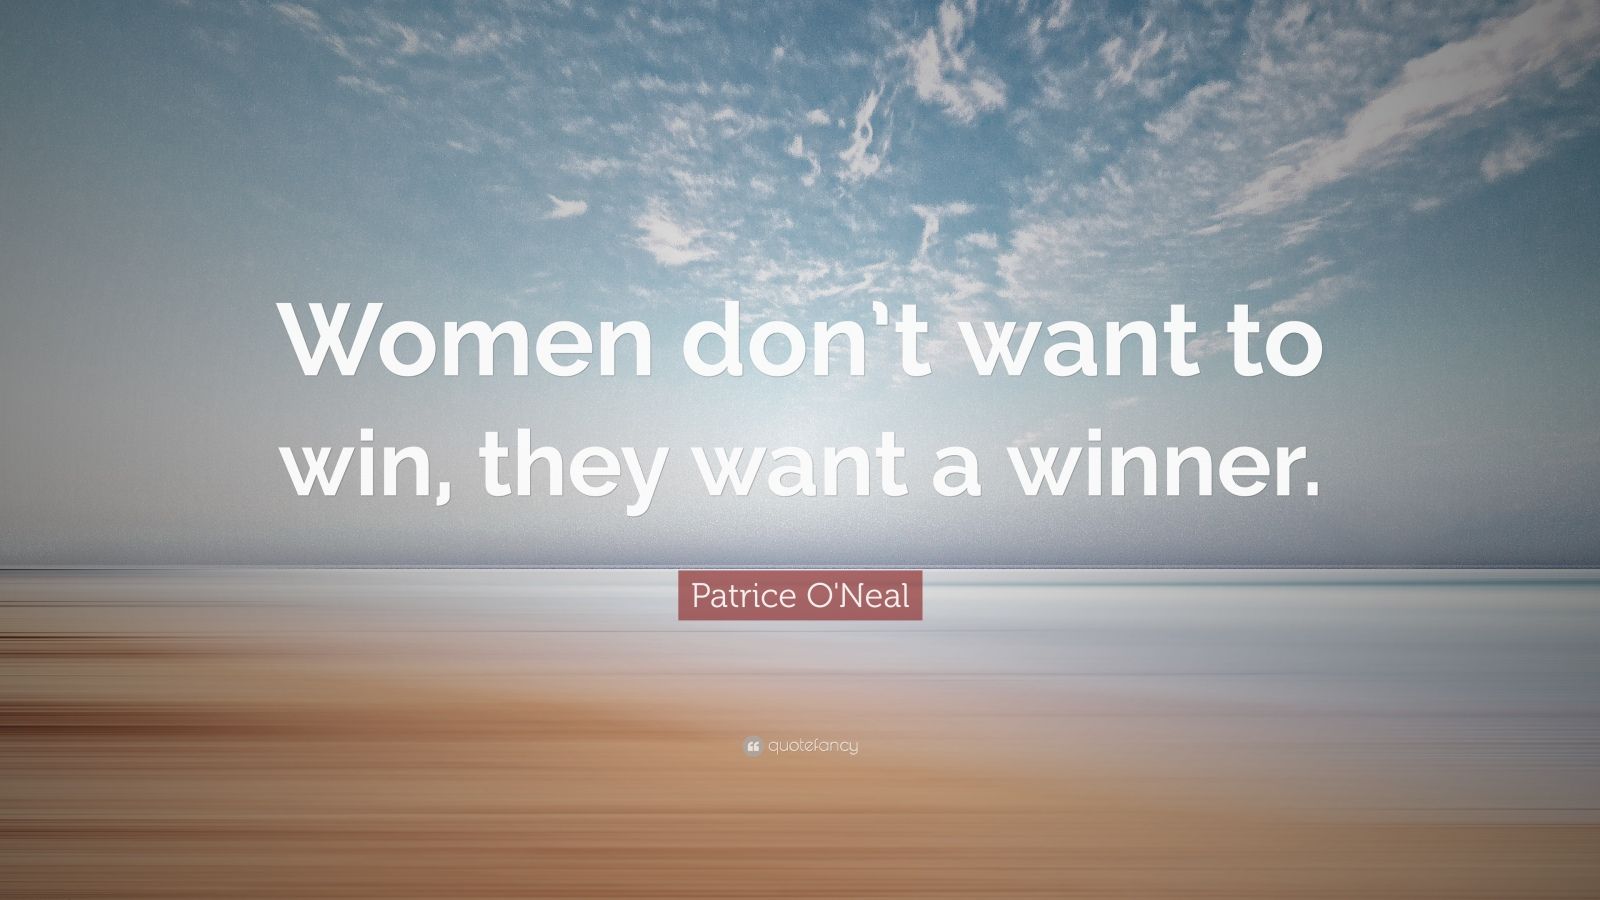 Patrice O'Neal Quote: “Women don’t want to win, they want a winner